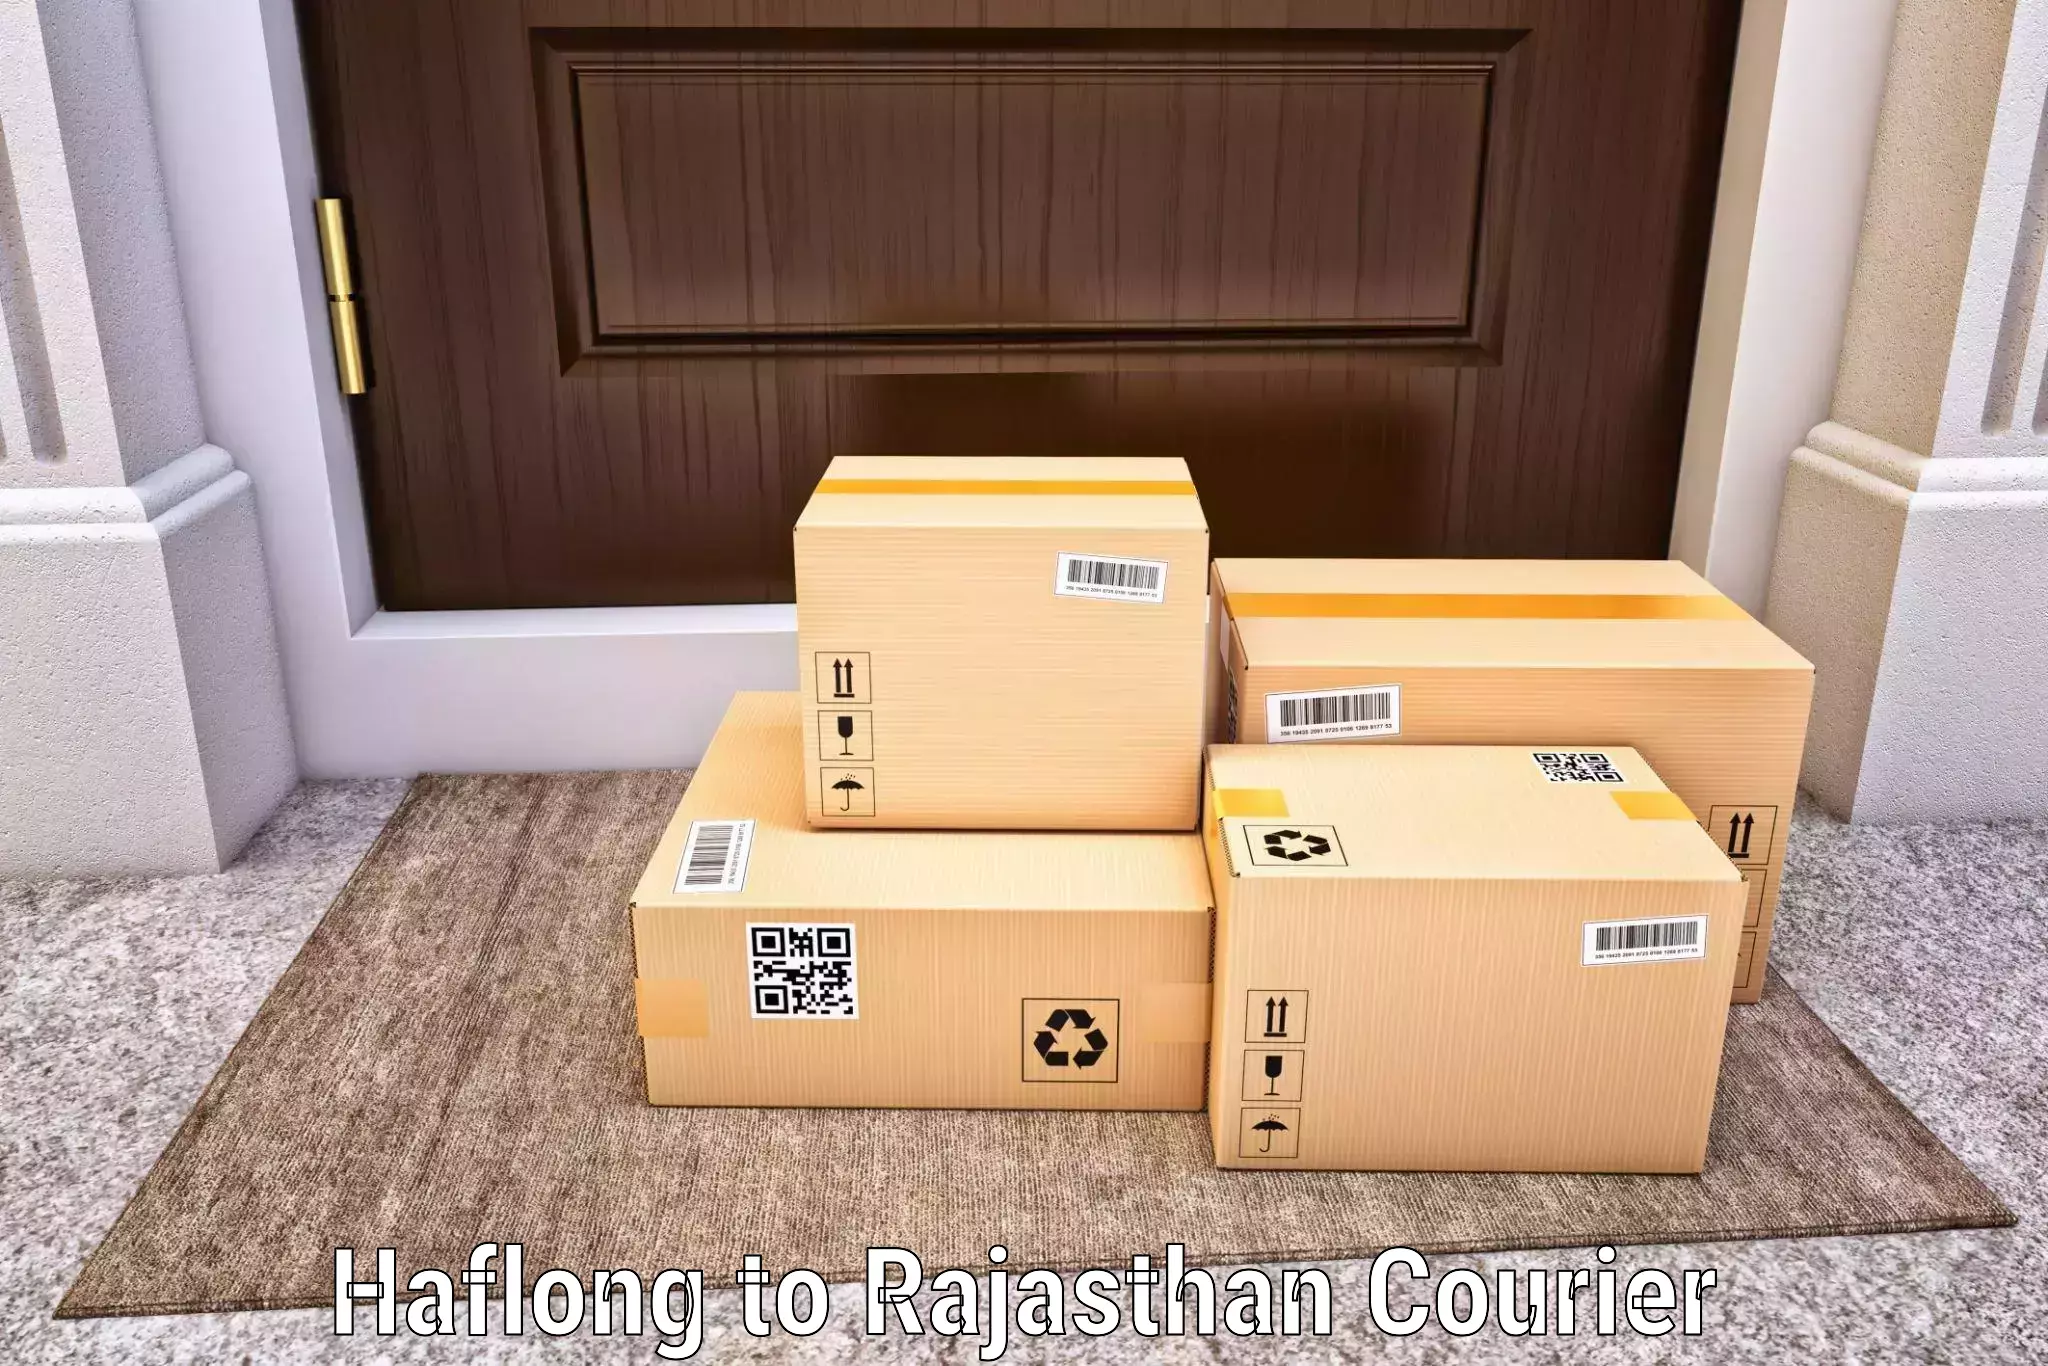 Next-day delivery options Haflong to Udaipur